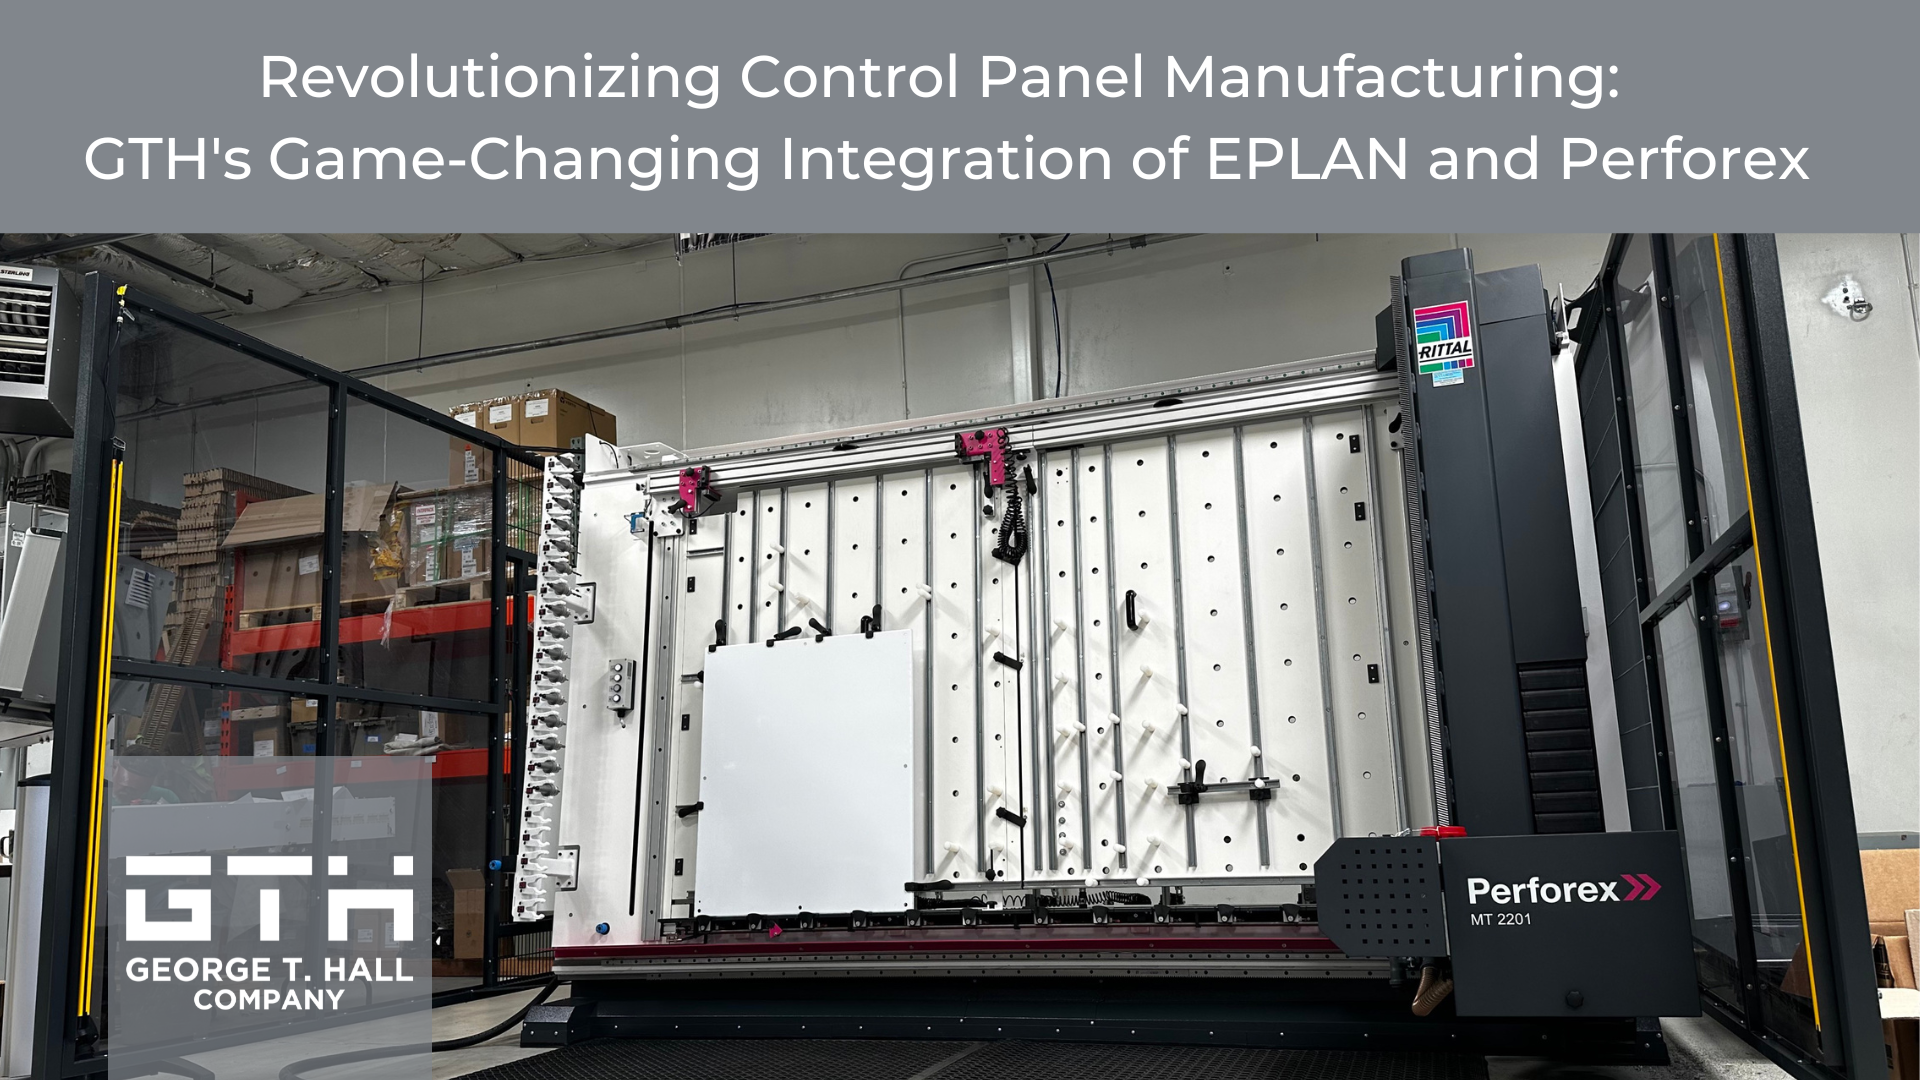 Revolutionizing control panel manufacturing: GTH's game-changing integration of EPLAN and Perforex